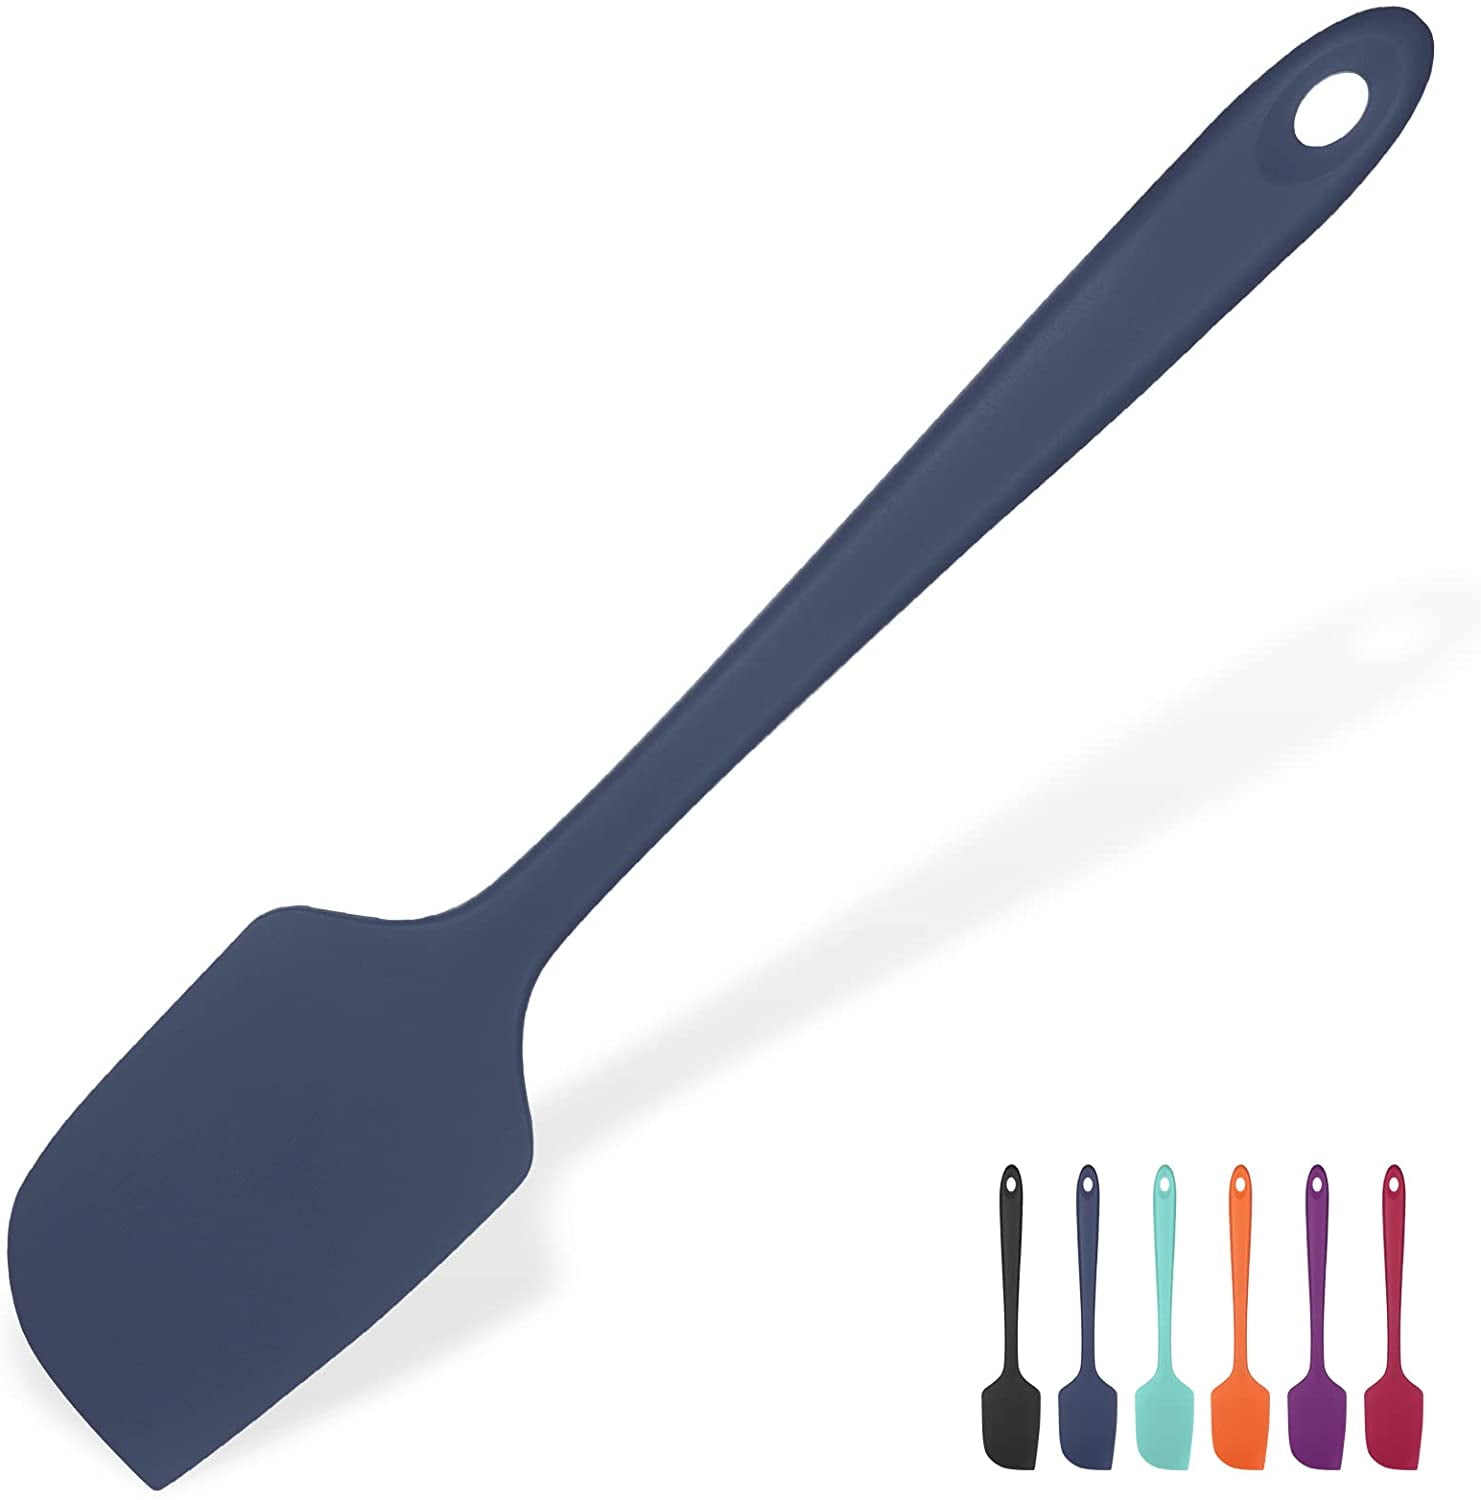 OXO Good Grips 3-Piece Silicone Spatula Set, x 2 sets (Total of 6